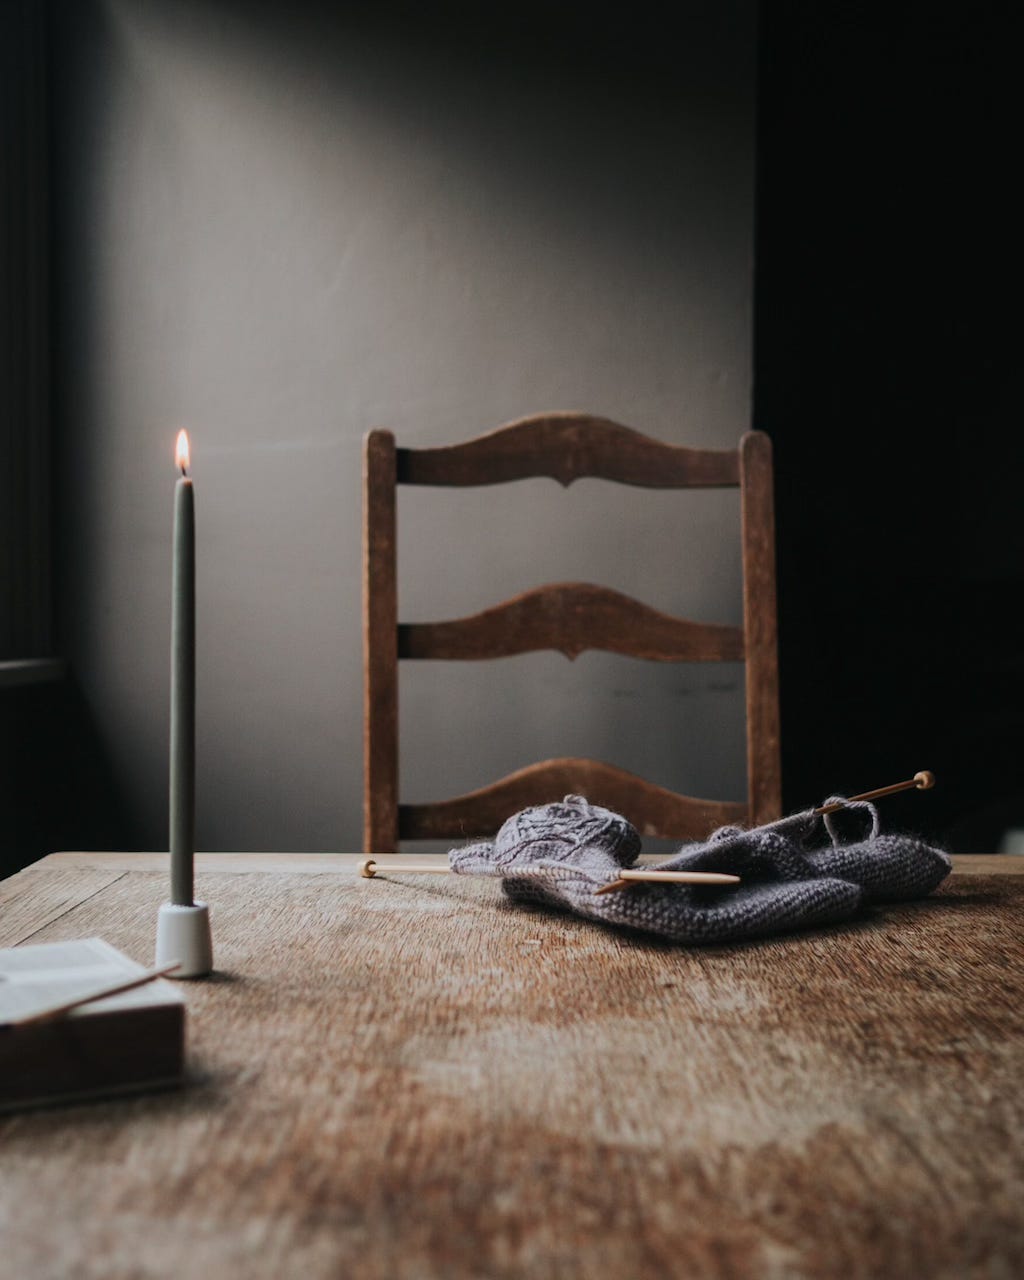 Candle, matchbox and knitting project on a wooden table 